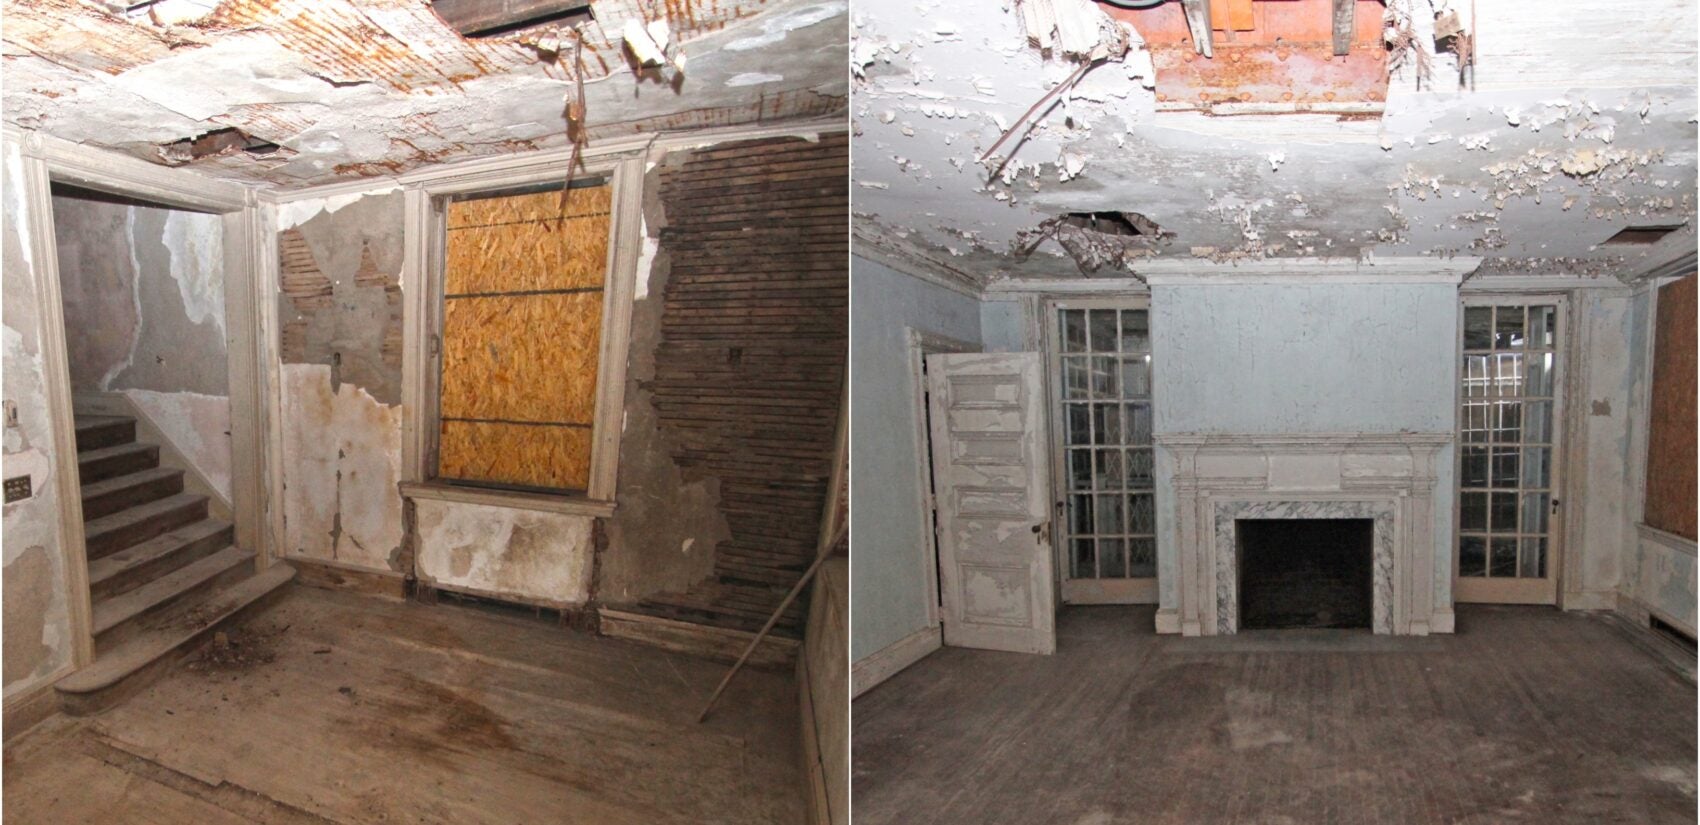 2 photos side by side showing deteriorating rooms inside the mansion